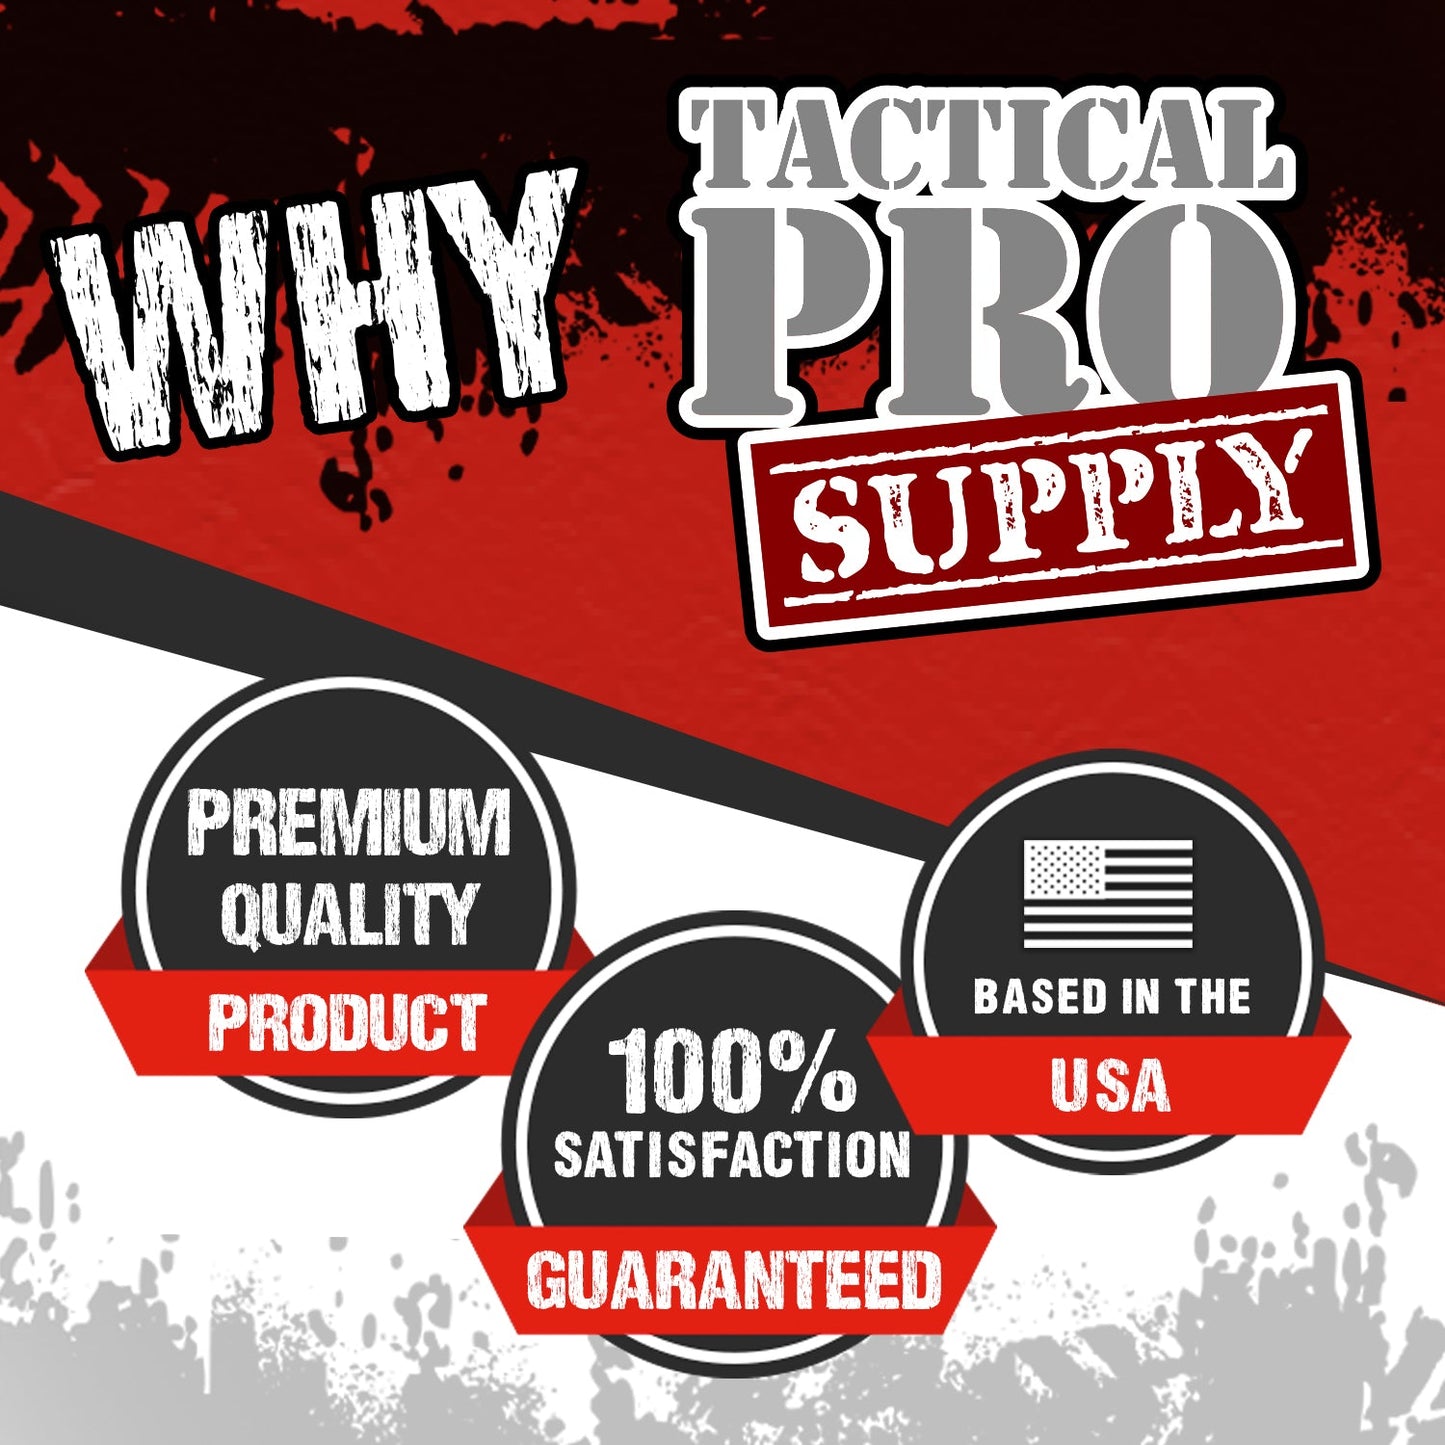 Lead the Pack - Tactical Pro Supply, LLC